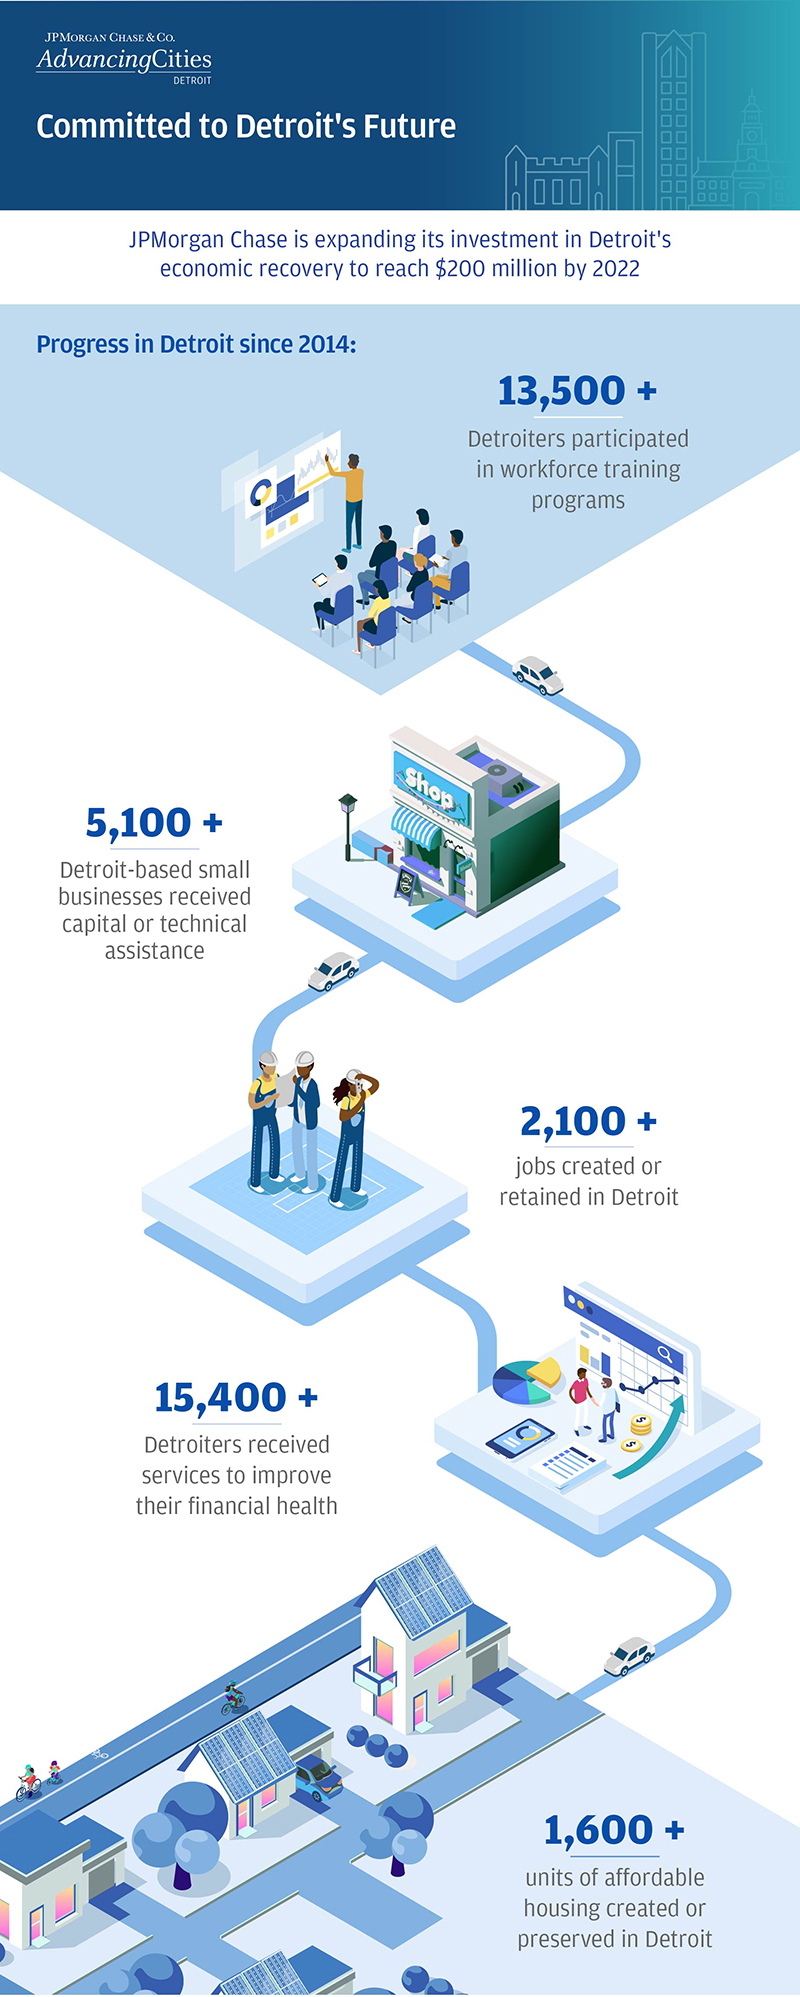 Infographic describes about Five years after jpmorgan chase's $150 million investment in detroit